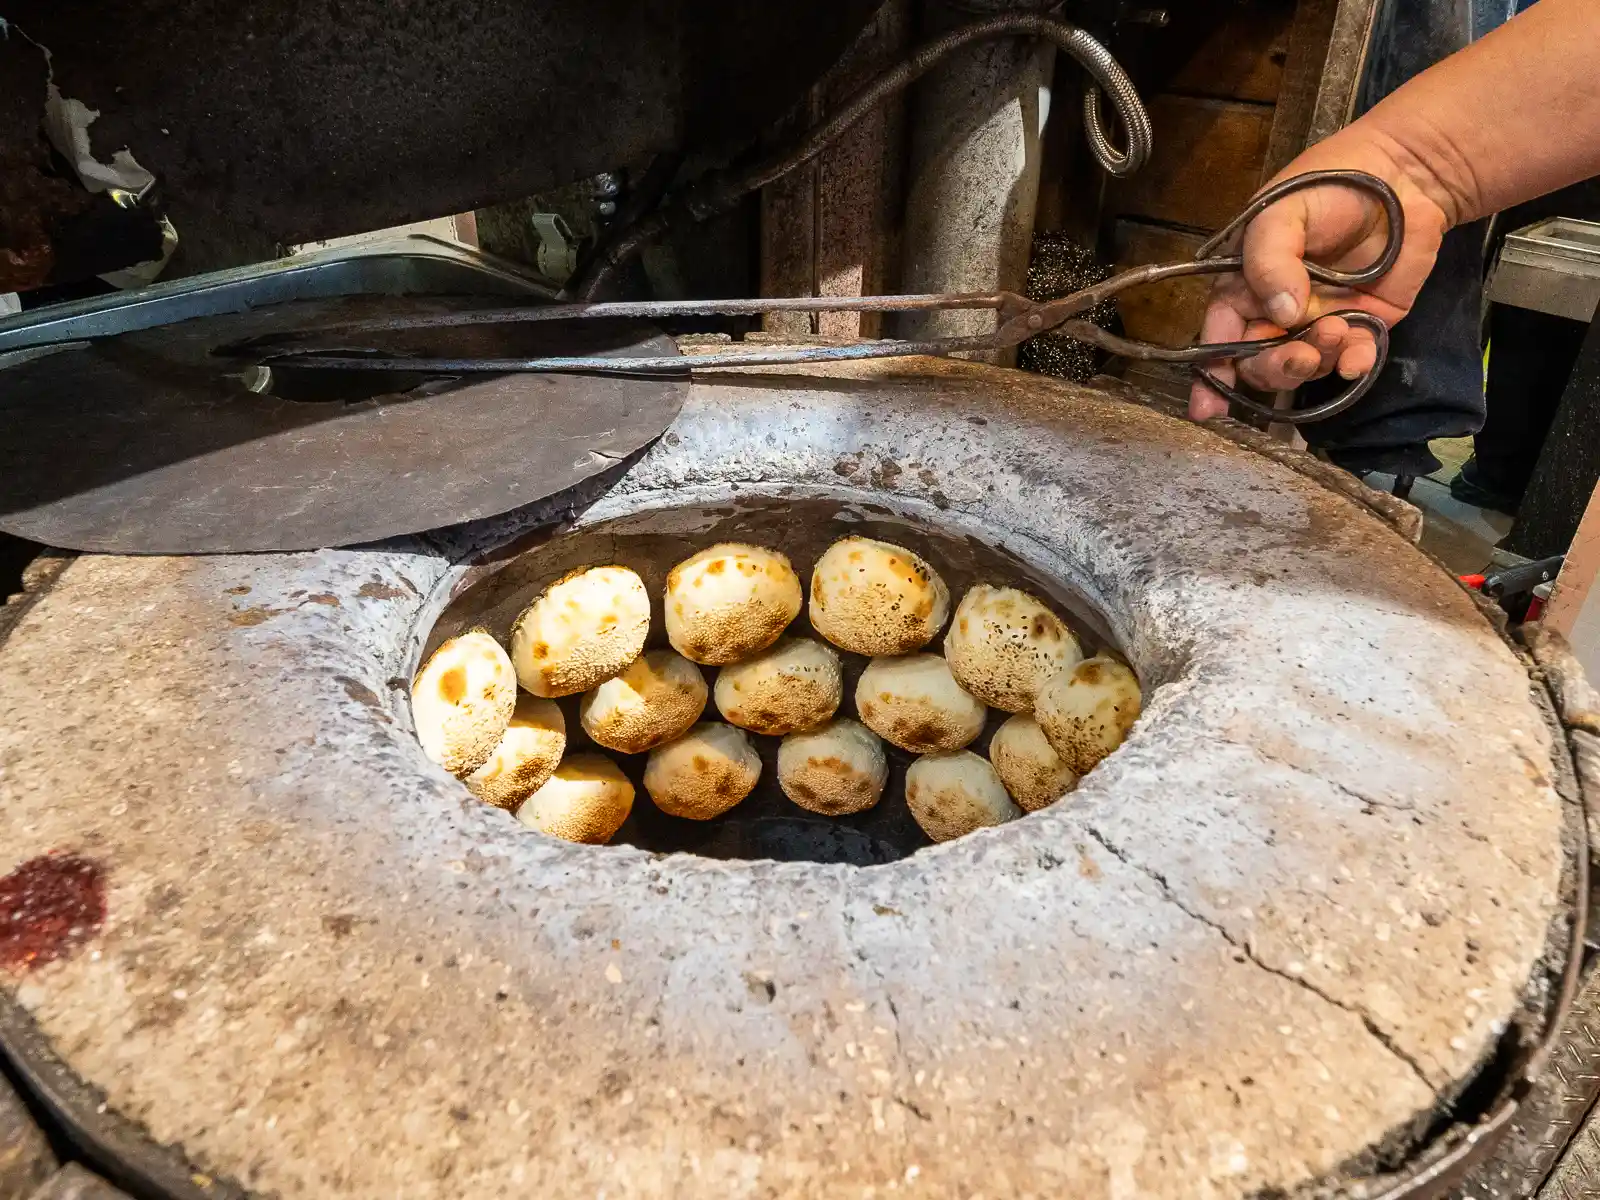 Oven-baked black pepper buns are cooking in a stone oven on the street.